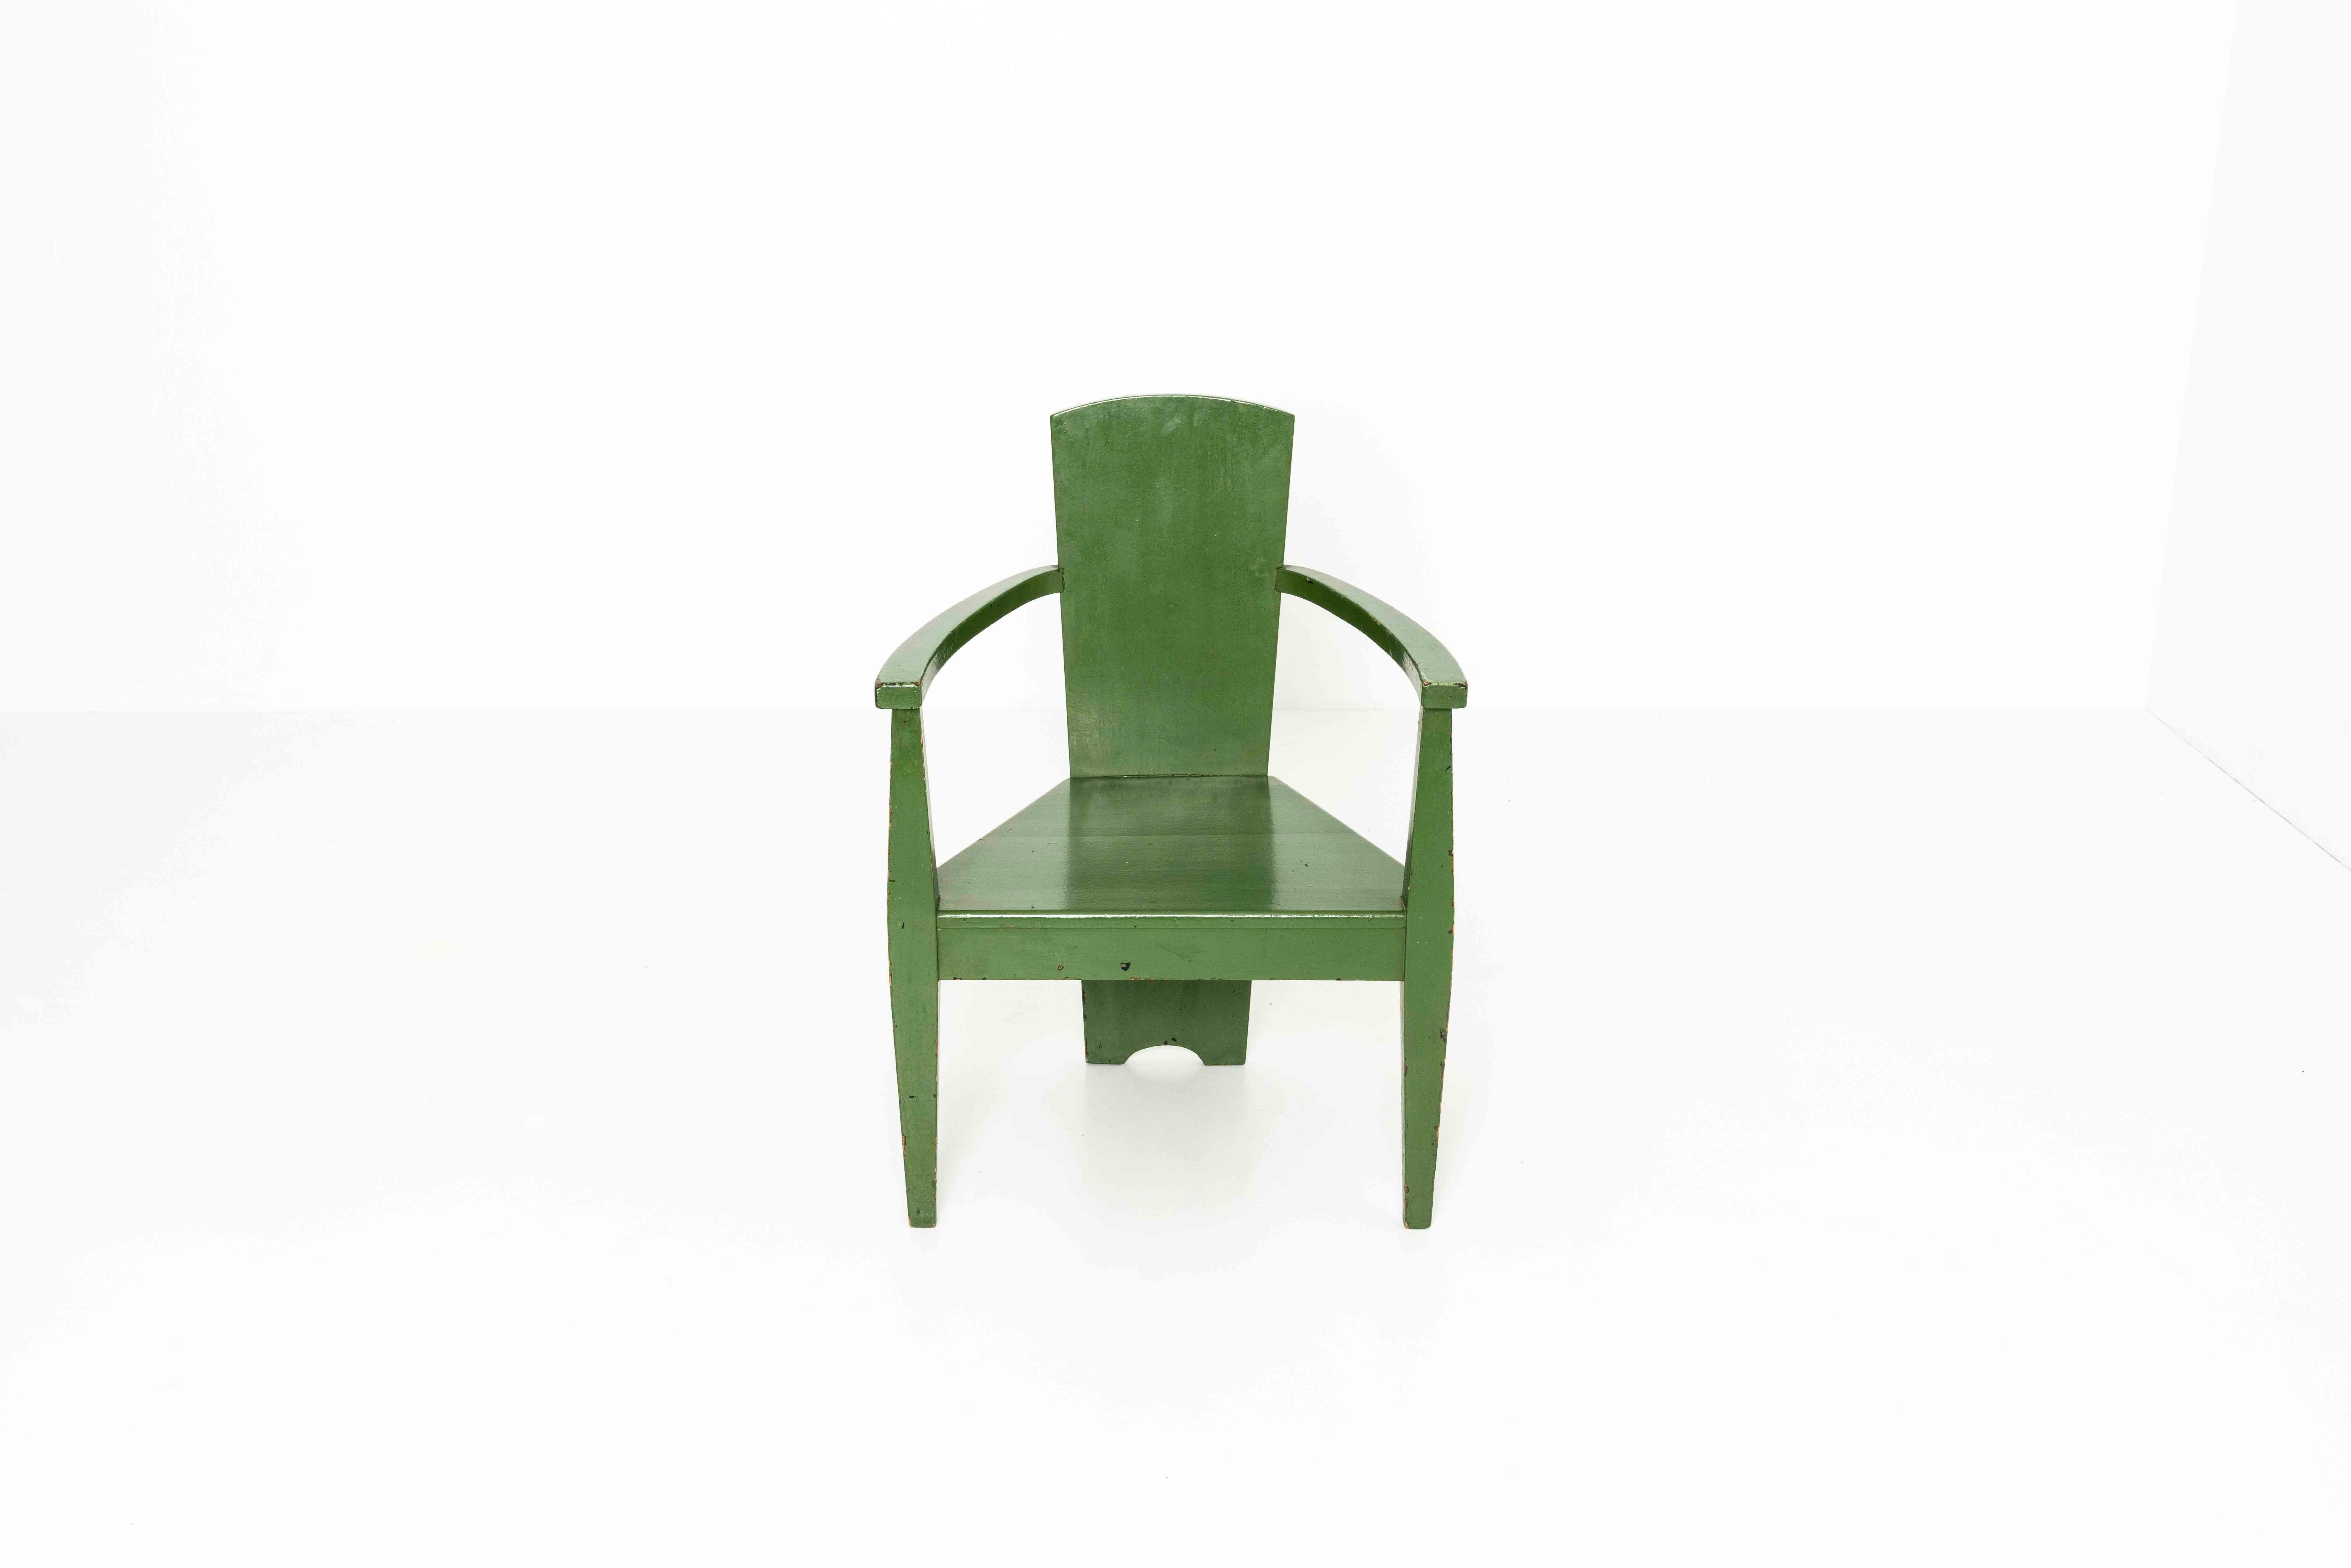 Very charming Bauhaus armchair in green paint from around the 1930s. Germany. Although clearly repainted later, the green really suits the chair and gives it a very nice patina. Therefore, we decided to keep it this way. The design is very